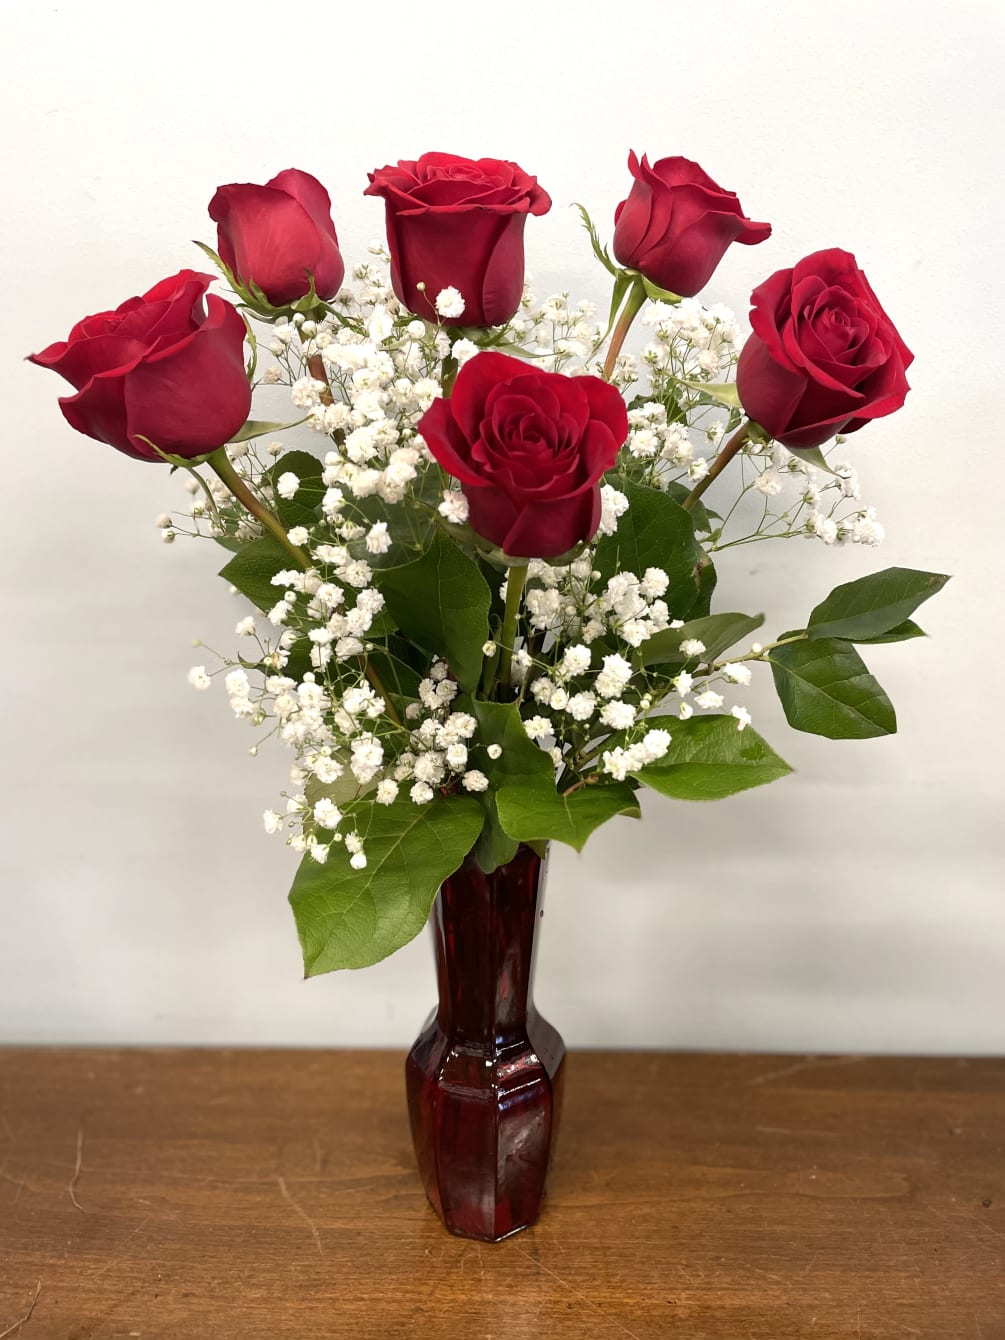 6 red roses are arranged in a red glass vase with babies